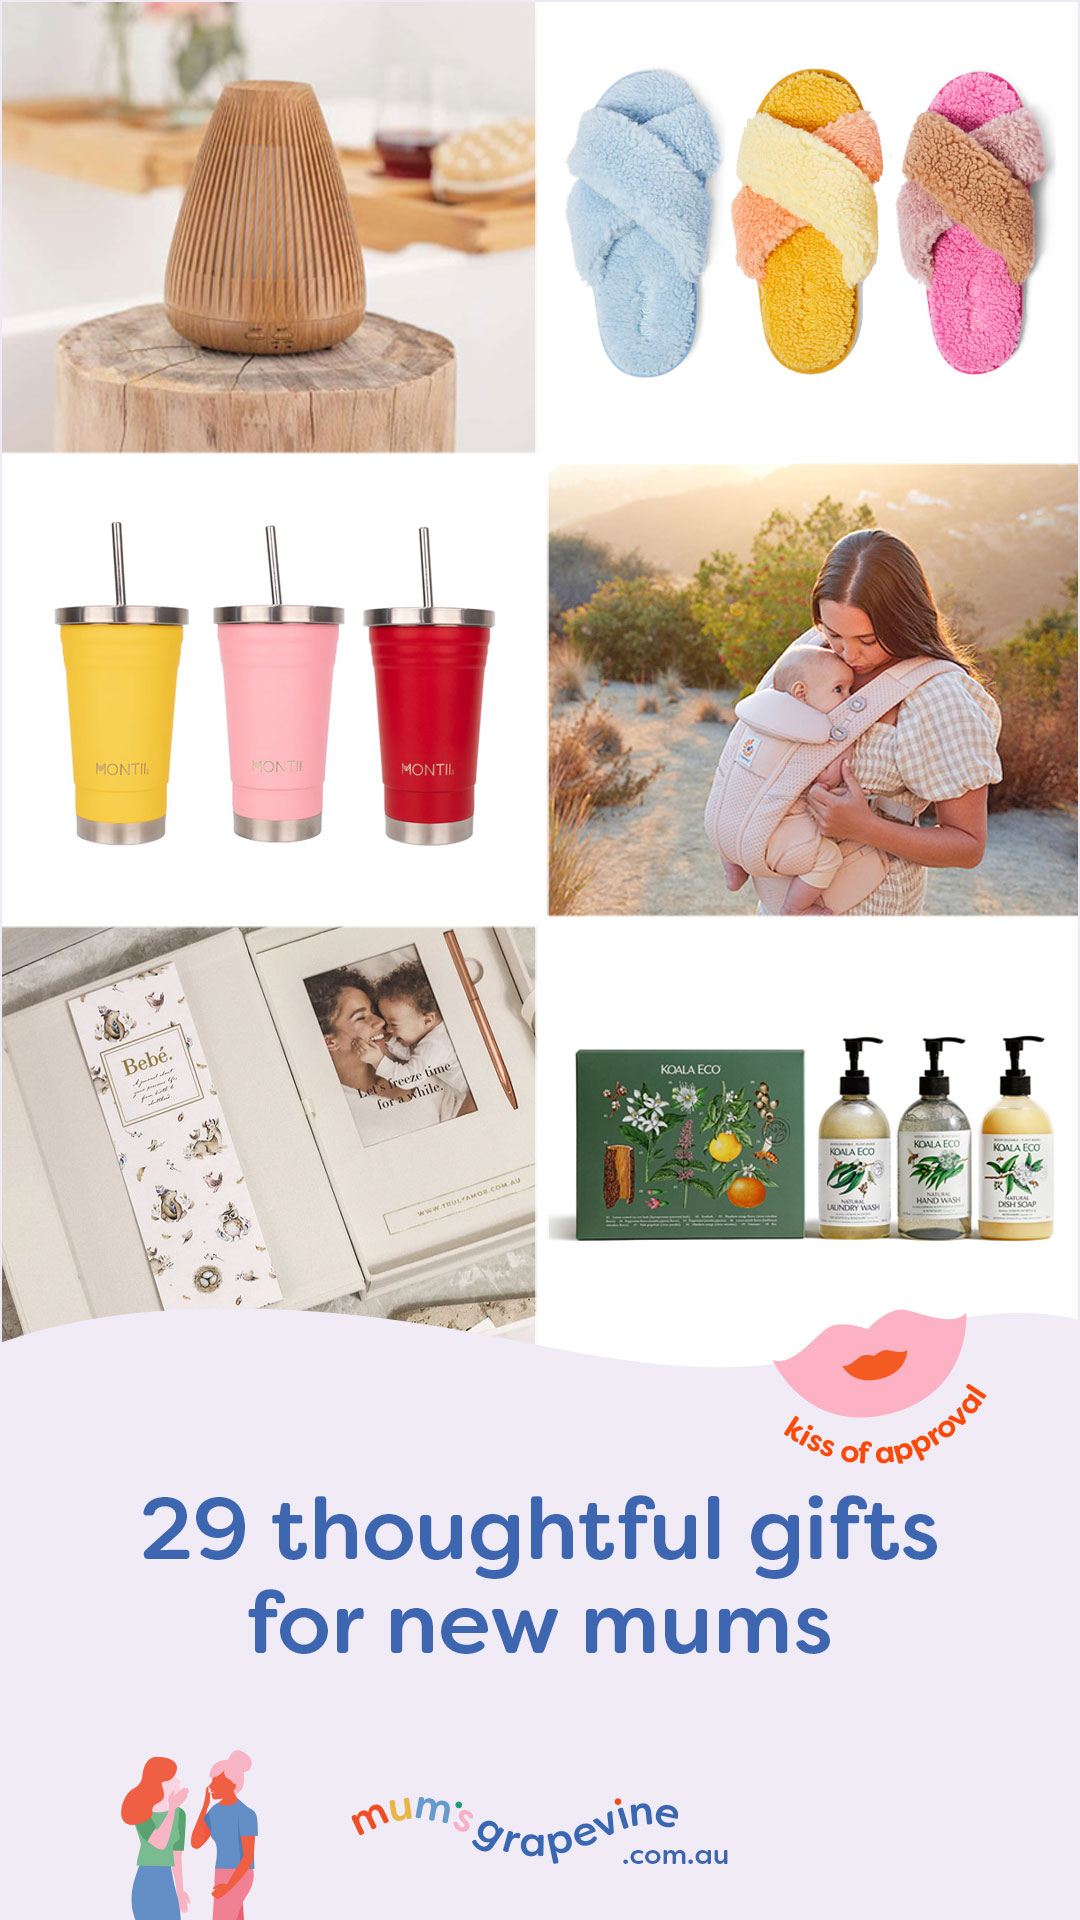 Comparison of six gift ideas for new mothers, showing different categories and styles of presents.